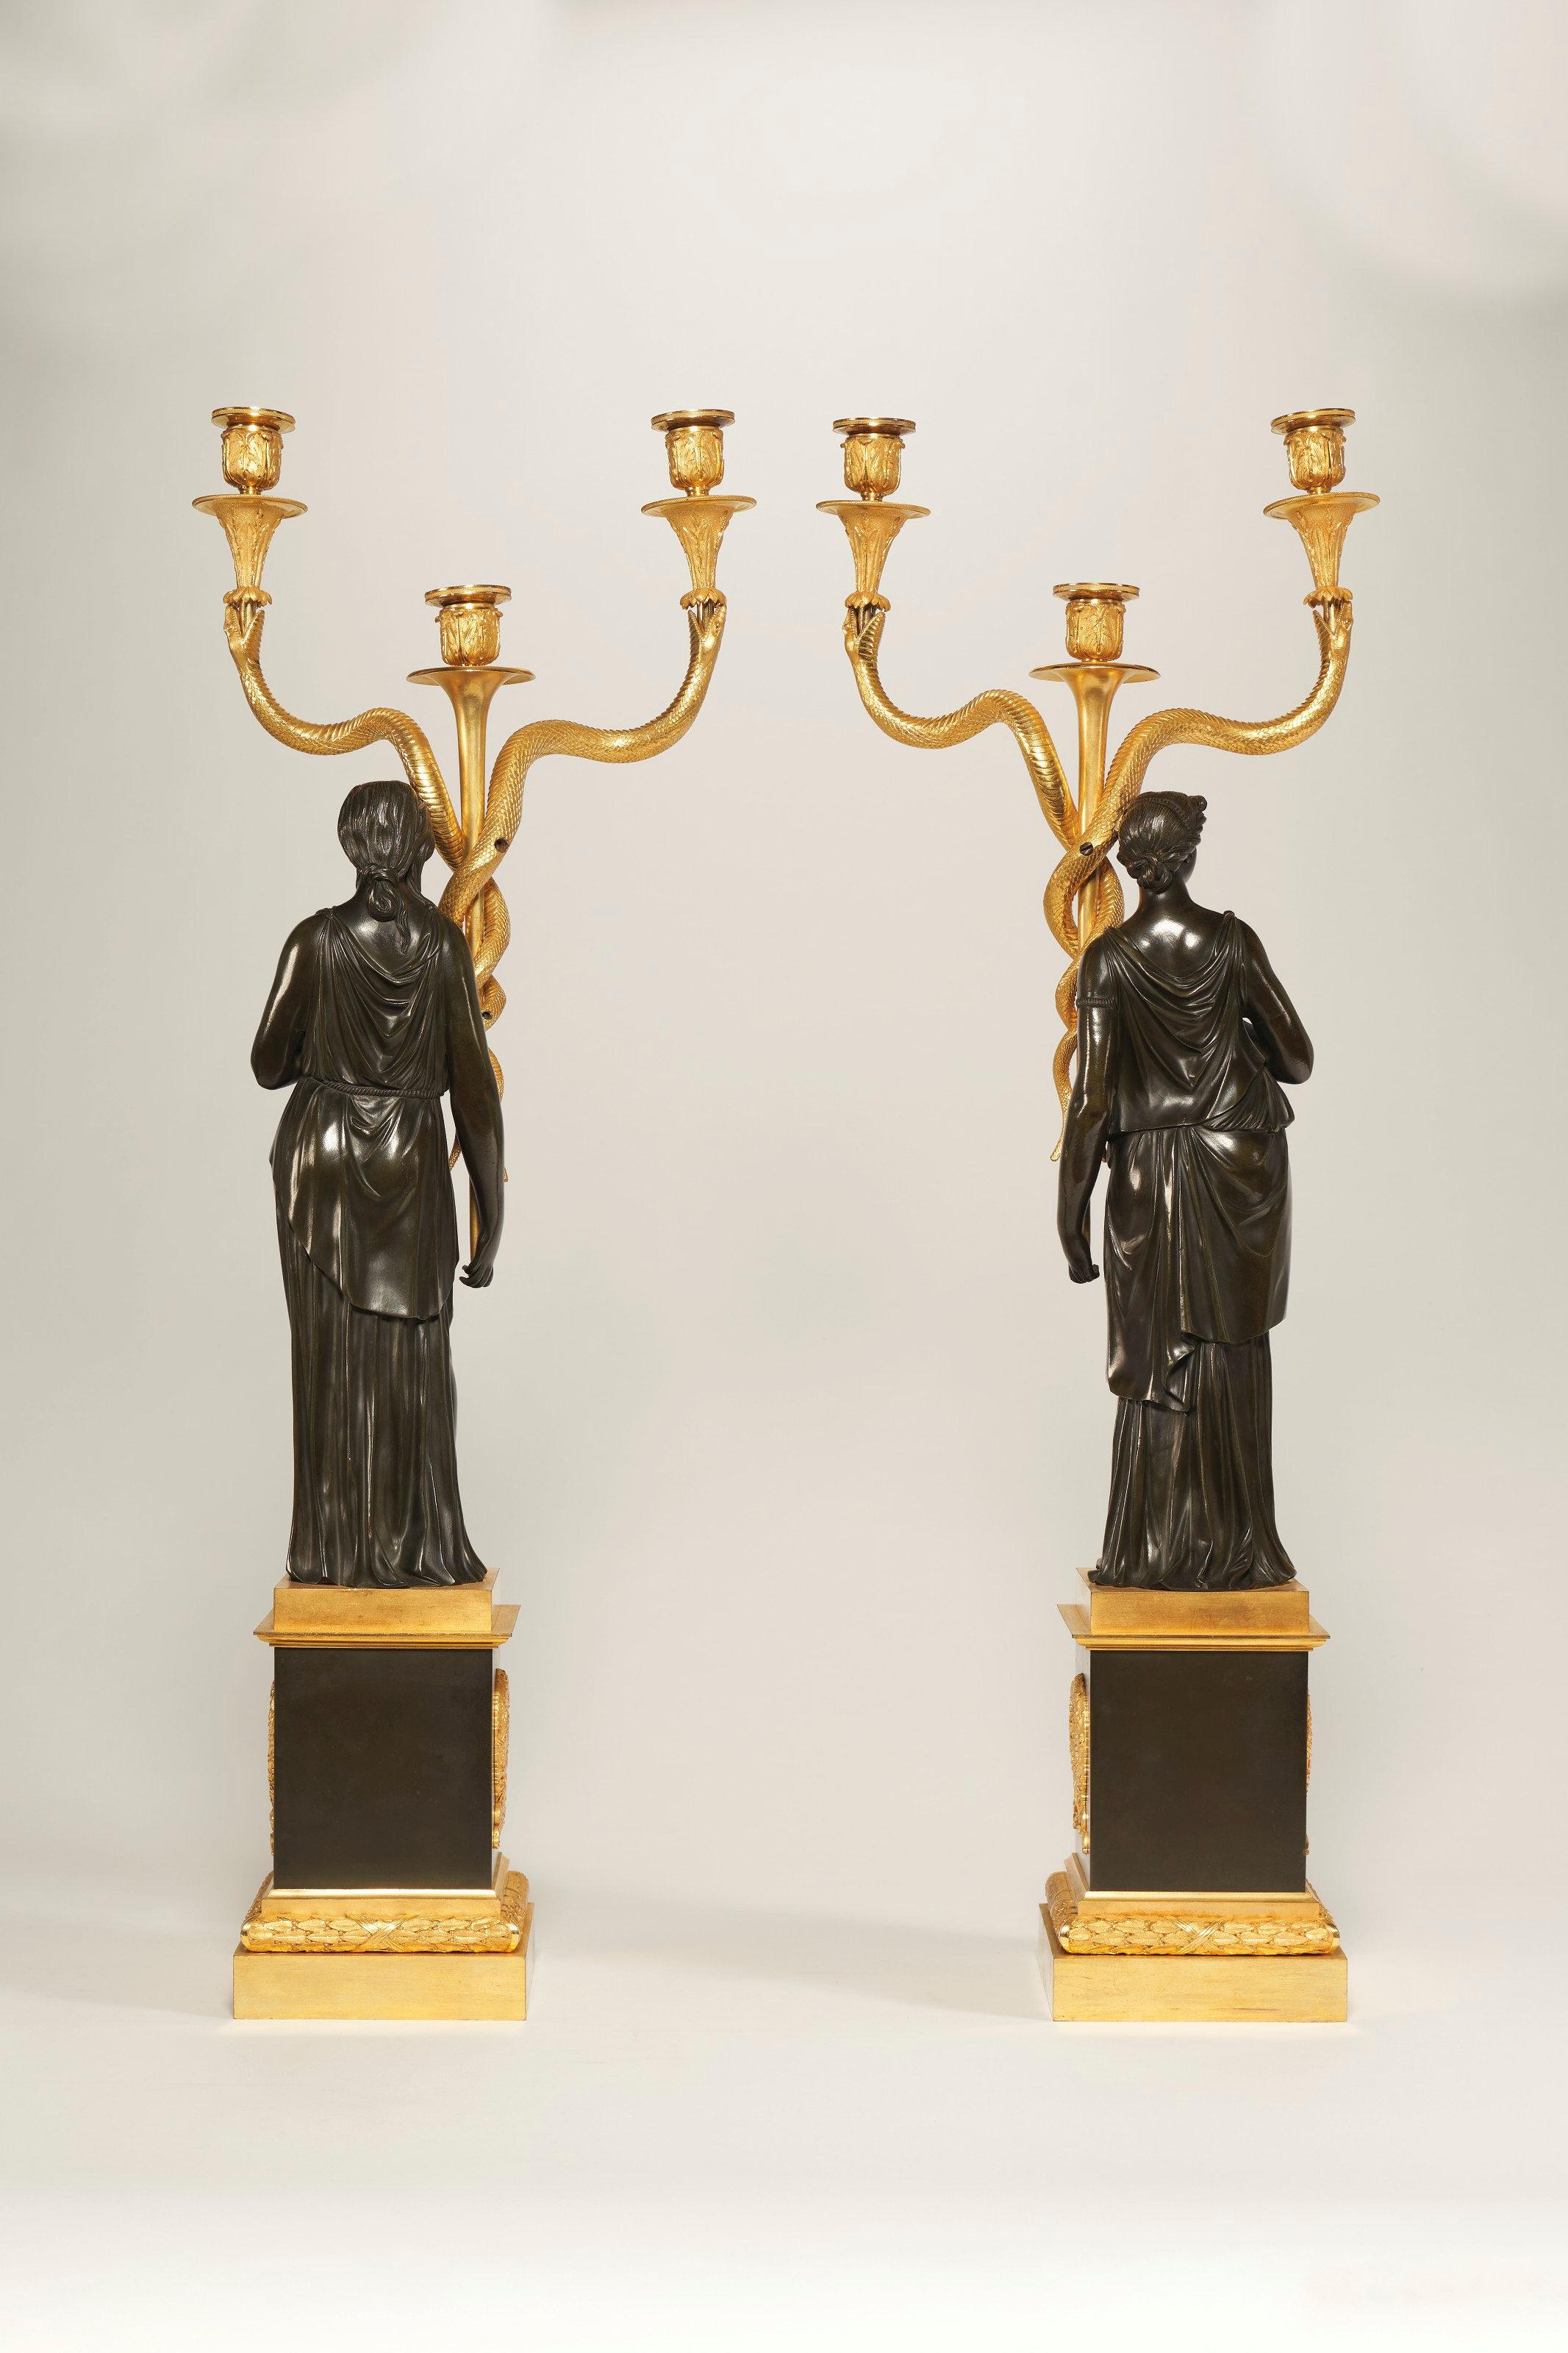 19th Century French Empire Style Ormolu and Patinated Bronze Figural Candelabra For Sale 1